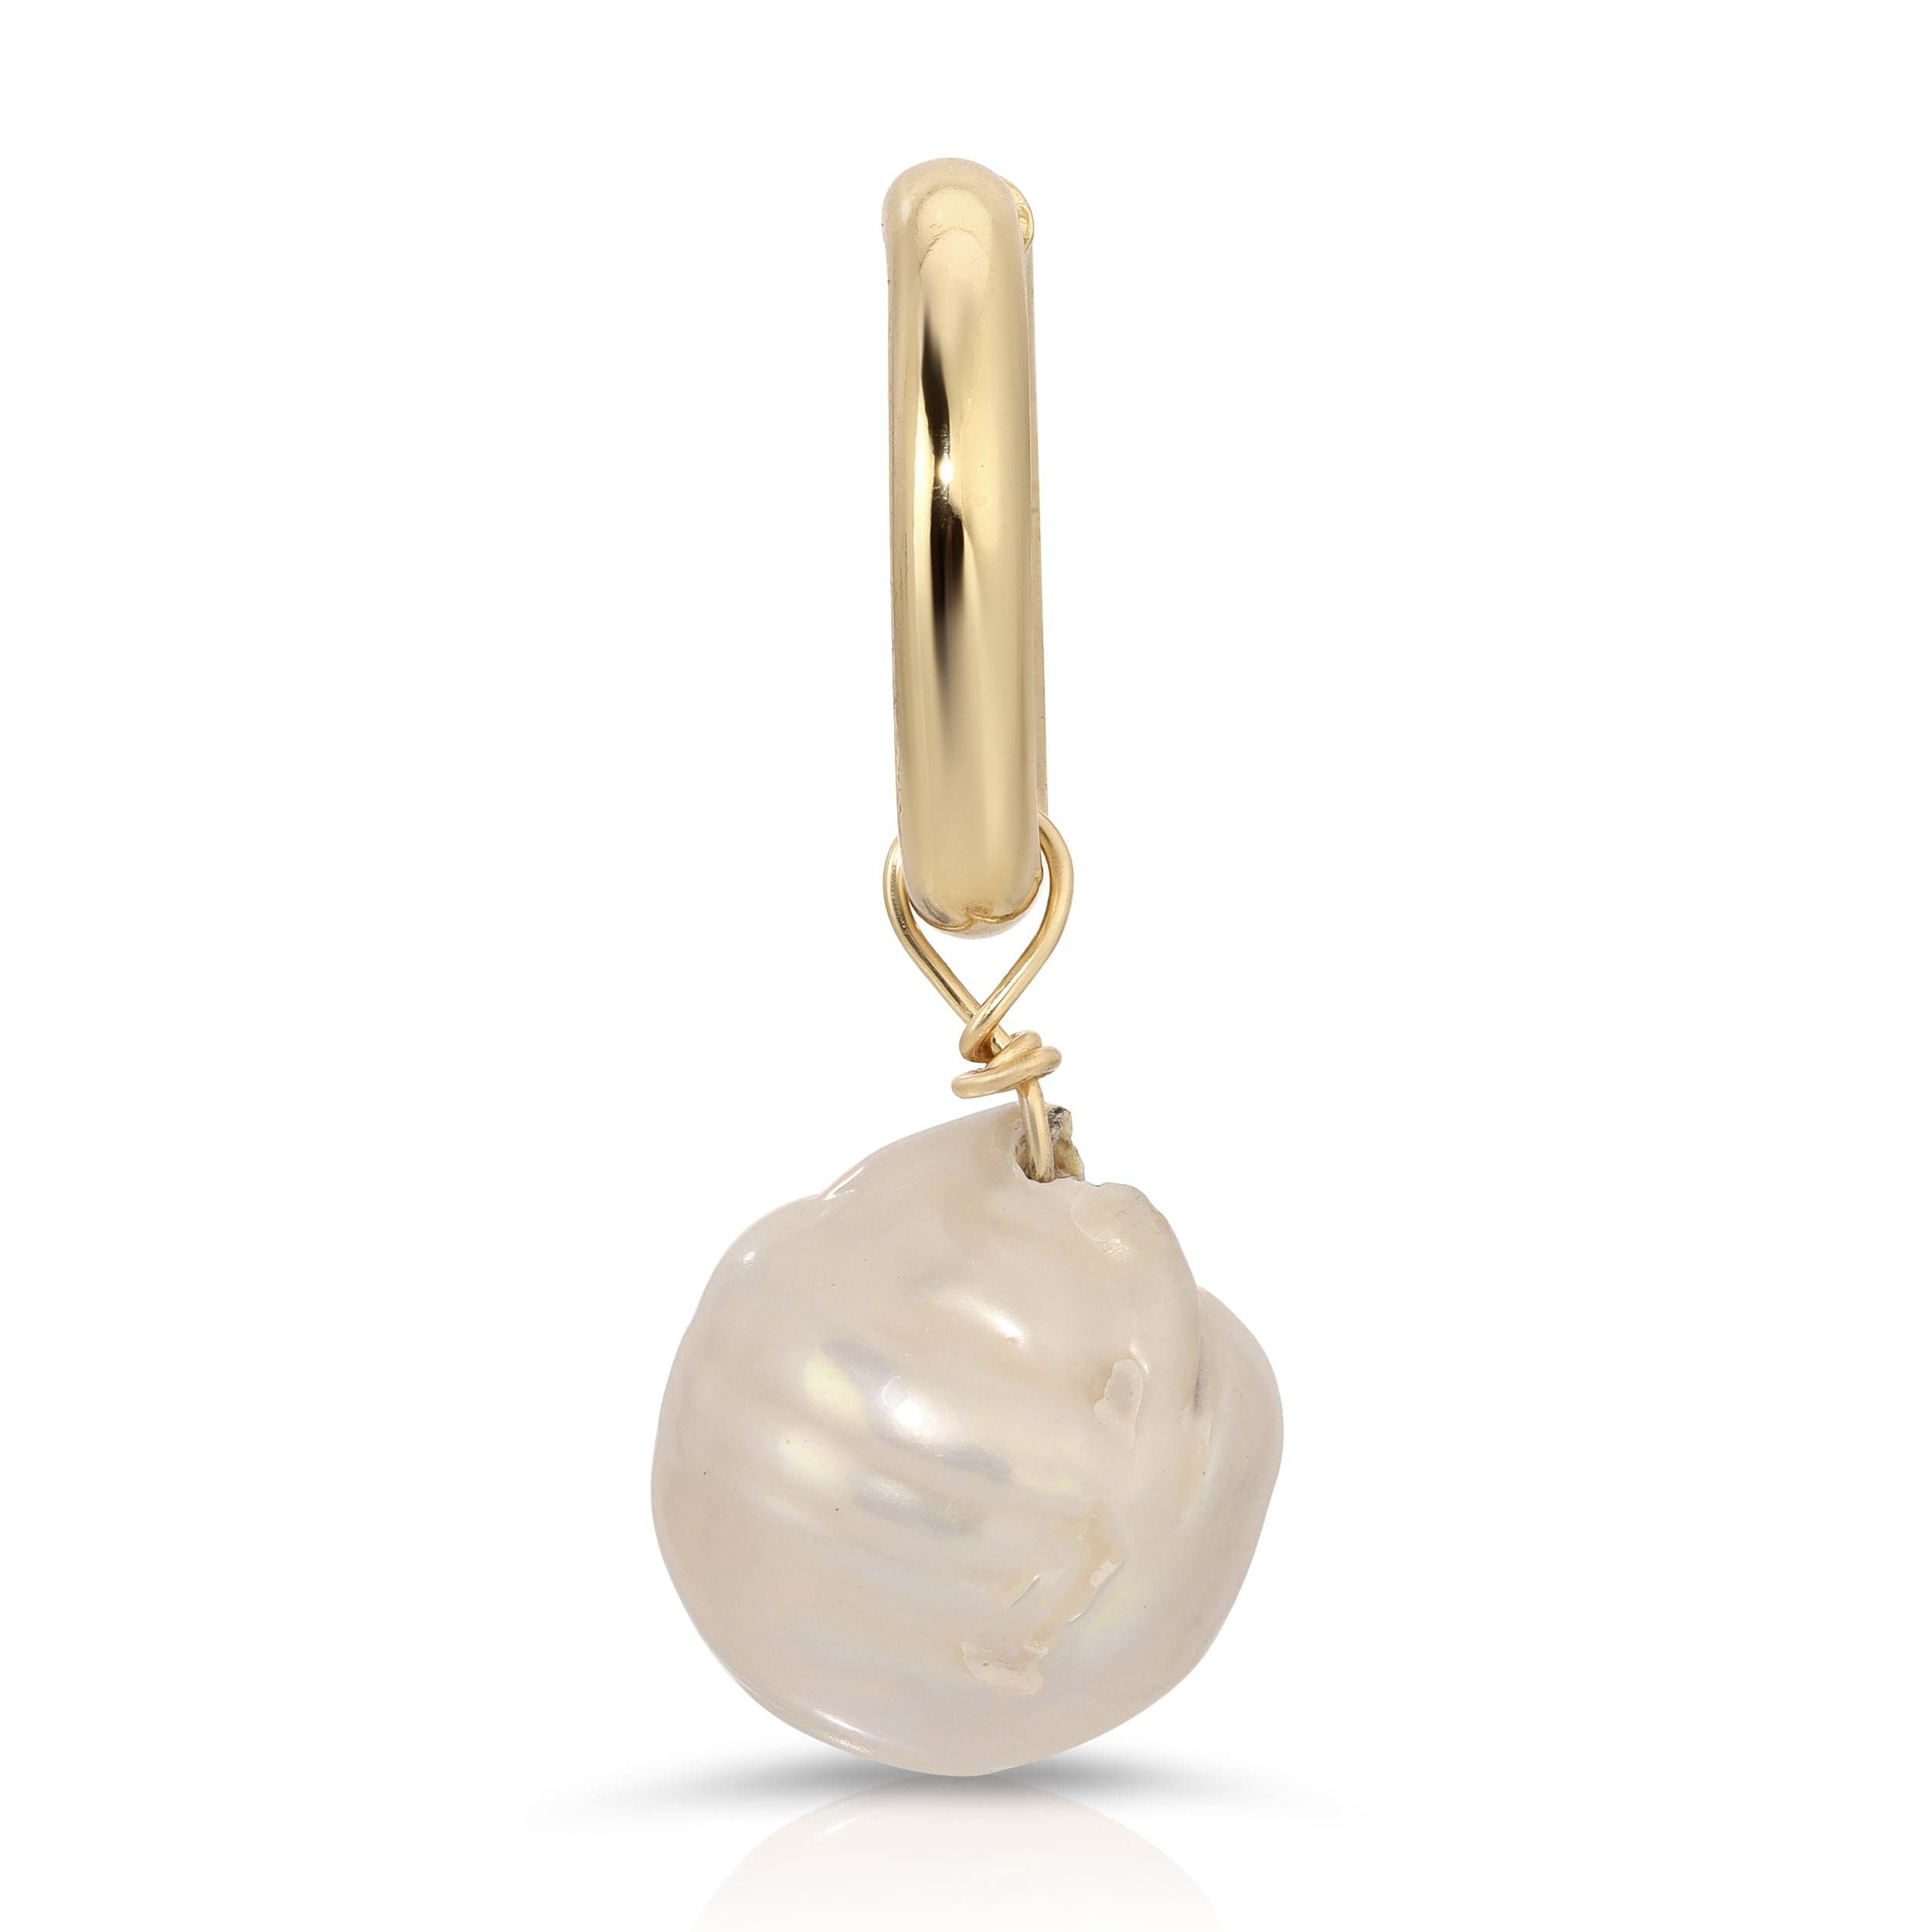 a pearl is hanging from a gold plated charm